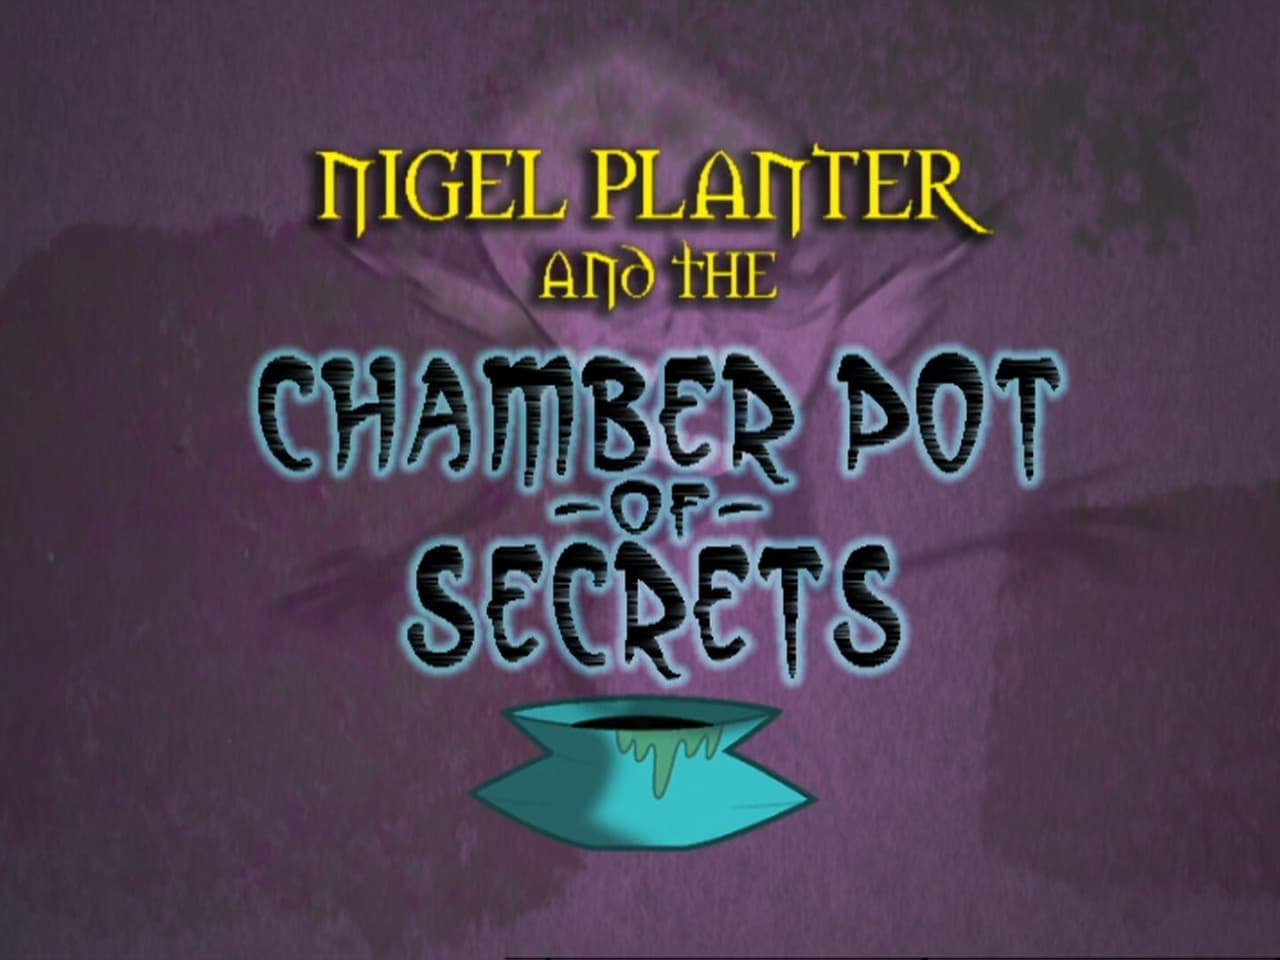 The Grim Adventures of Billy and Mandy - Season 3 Episode 12 : Nigel Planter and the Chamber Pot of Secrets